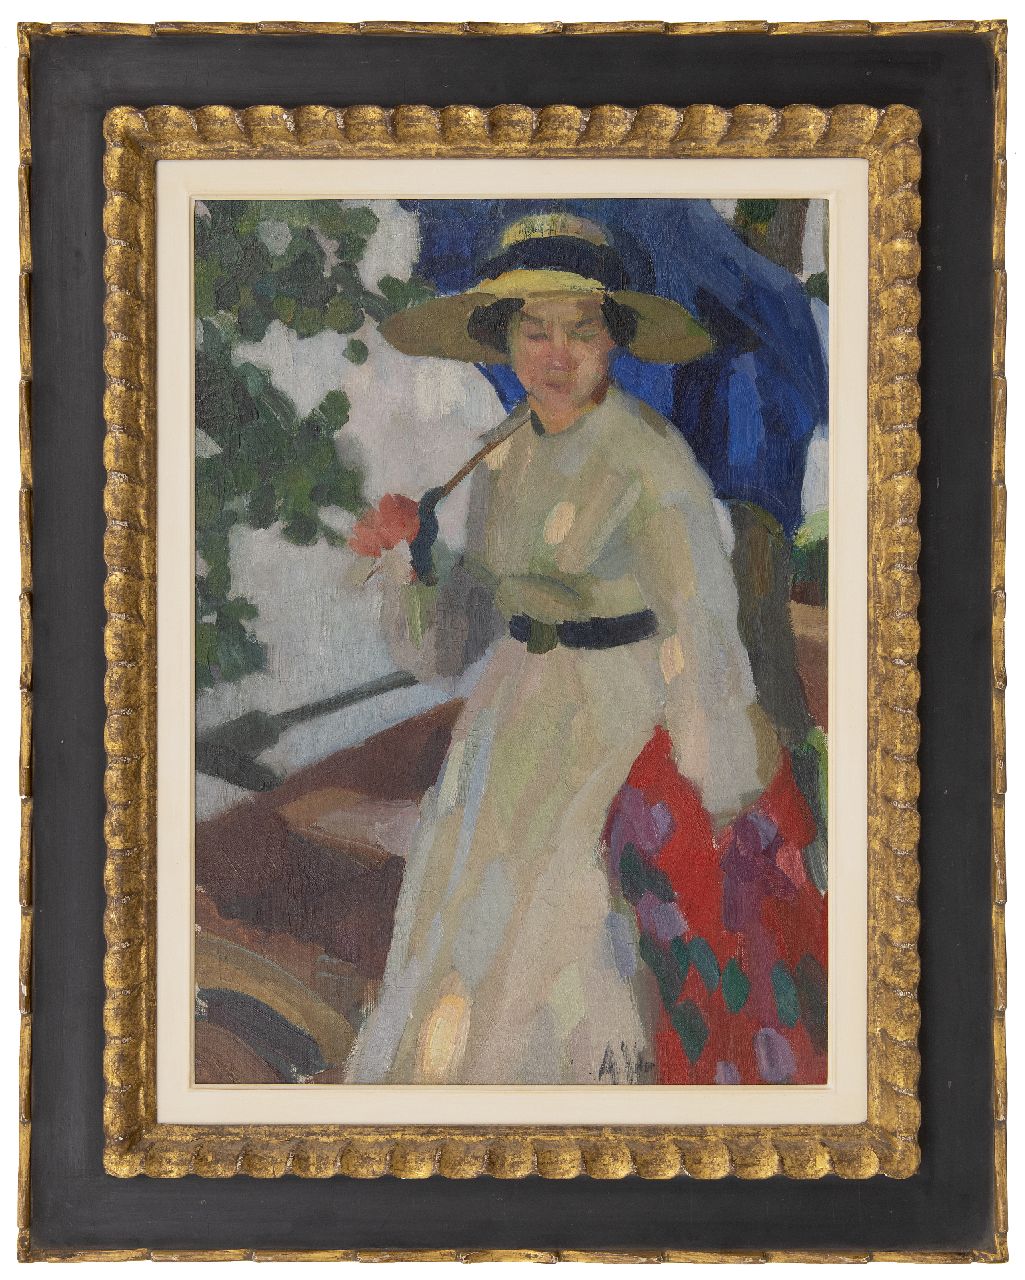 Höfer A.  | Adolf Höfer | Paintings offered for sale | A lady with a straw hat and parasol, oil on canvas laid down on board 63.3 x 45.8 cm, signed r.c. with initials and painted ca. 1910